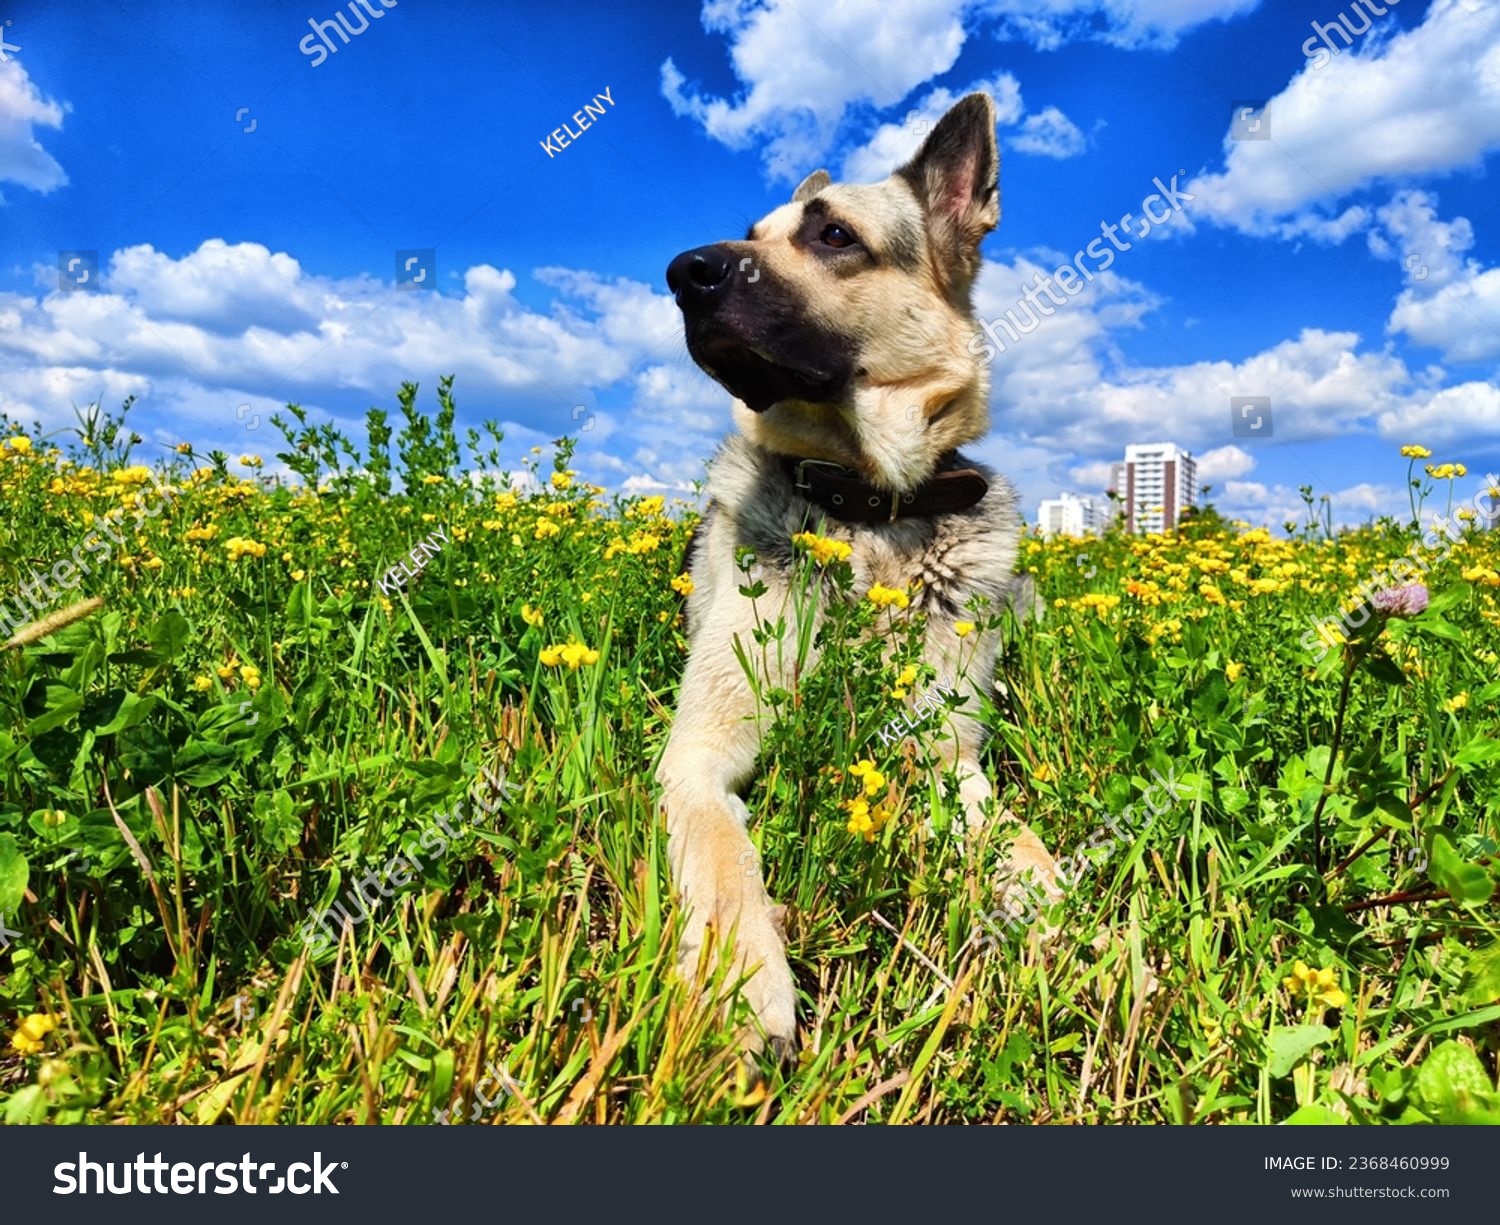 Dog German Shepherd in autumn, summer, spring day and green field with grass and flower in spring or summer day. Walking and waiting on meadow eastern European dog veo and green landscape #2368460999